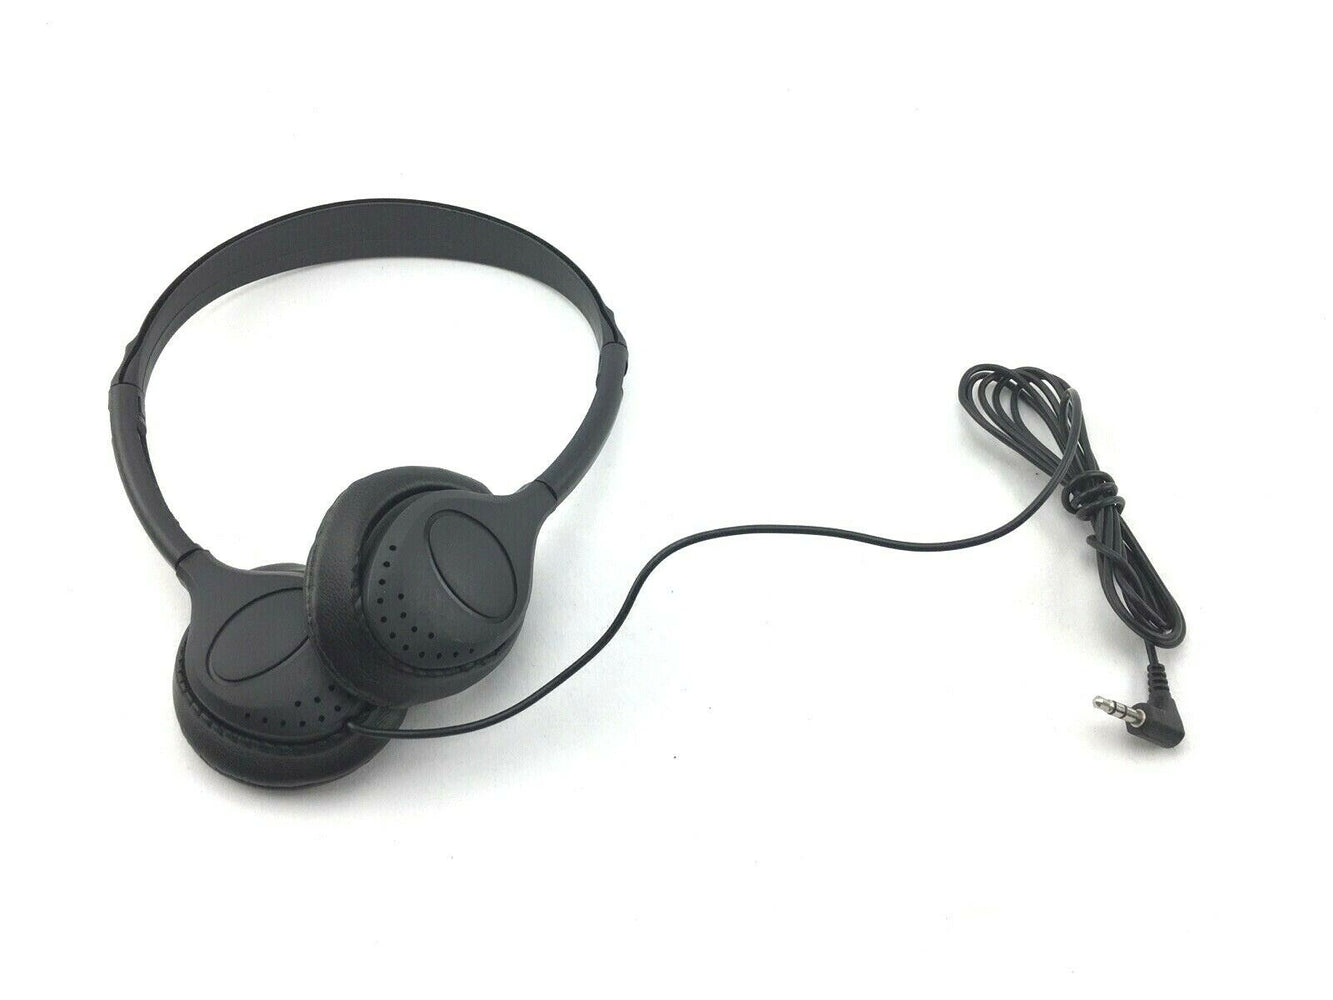 Generic Economical Adjustable Headphones 4ft Cord Fast Shipping from the USA